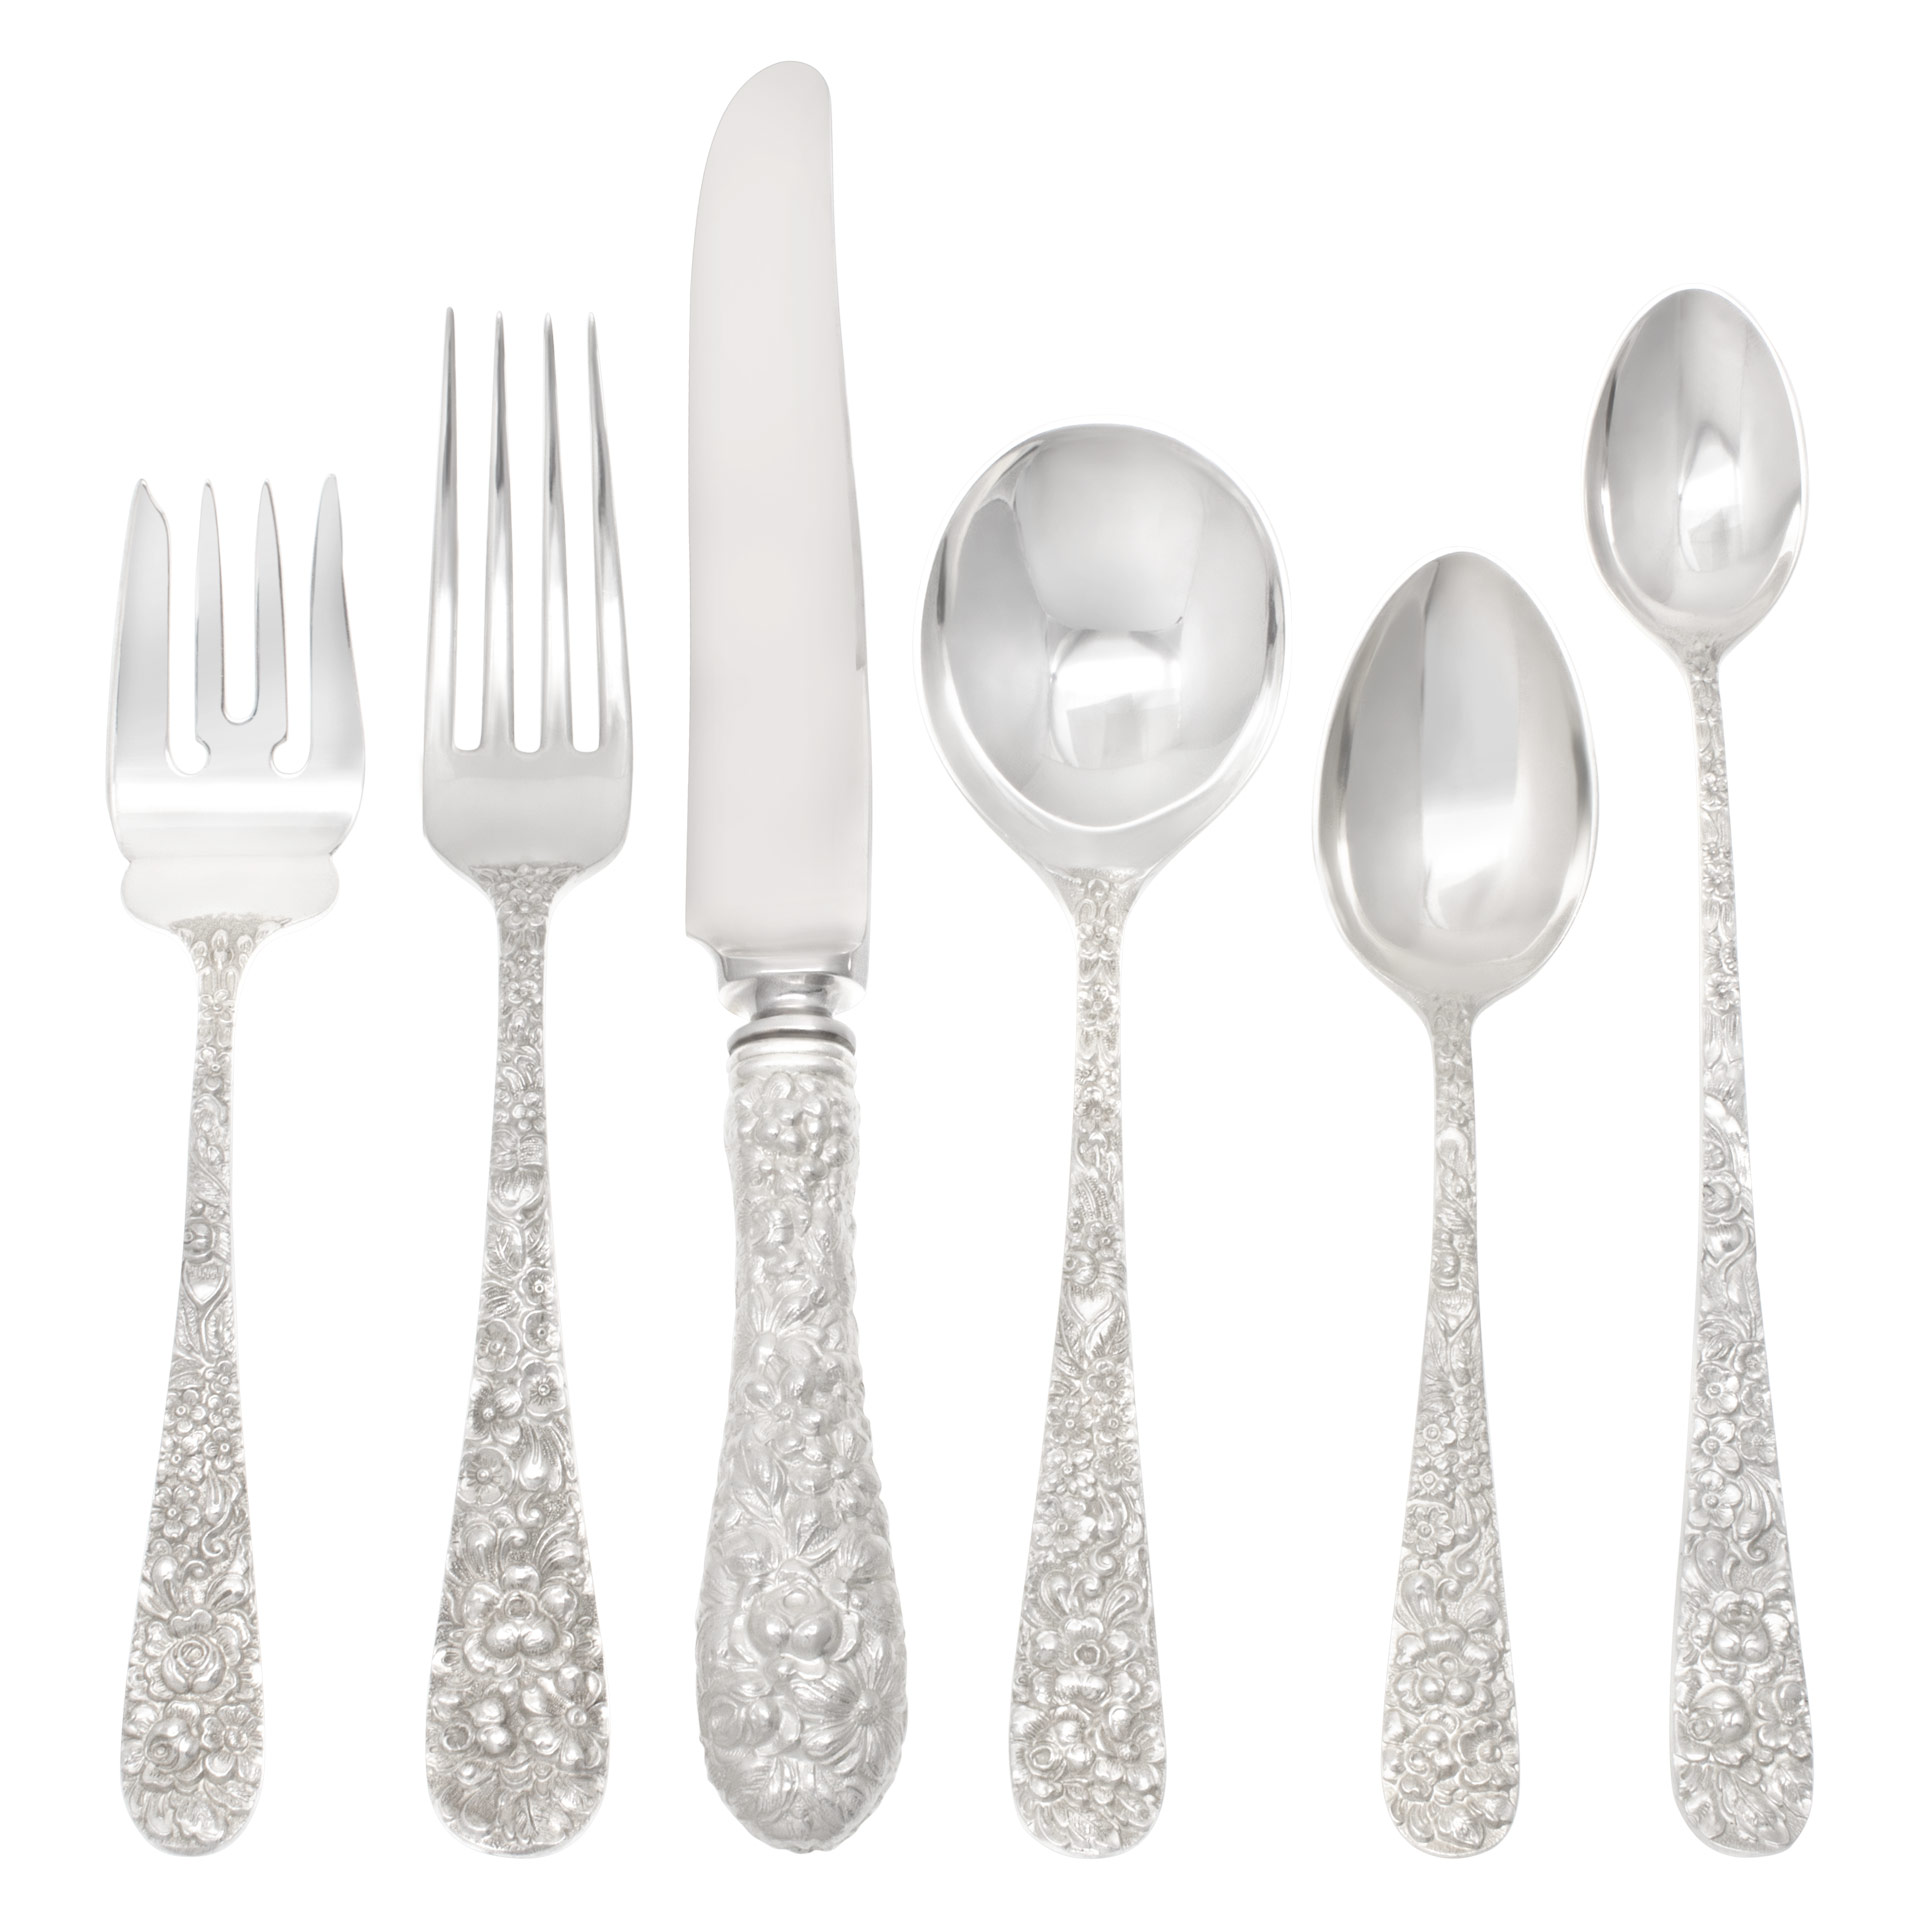 Antique "ROSE REPOUSSE" complete sterling silver flatware set patented in 1892 by Stieff Sterling Silver Co. 6 place setting for 12 + 20 serving pieces. Over 3800 grams sterling silver.